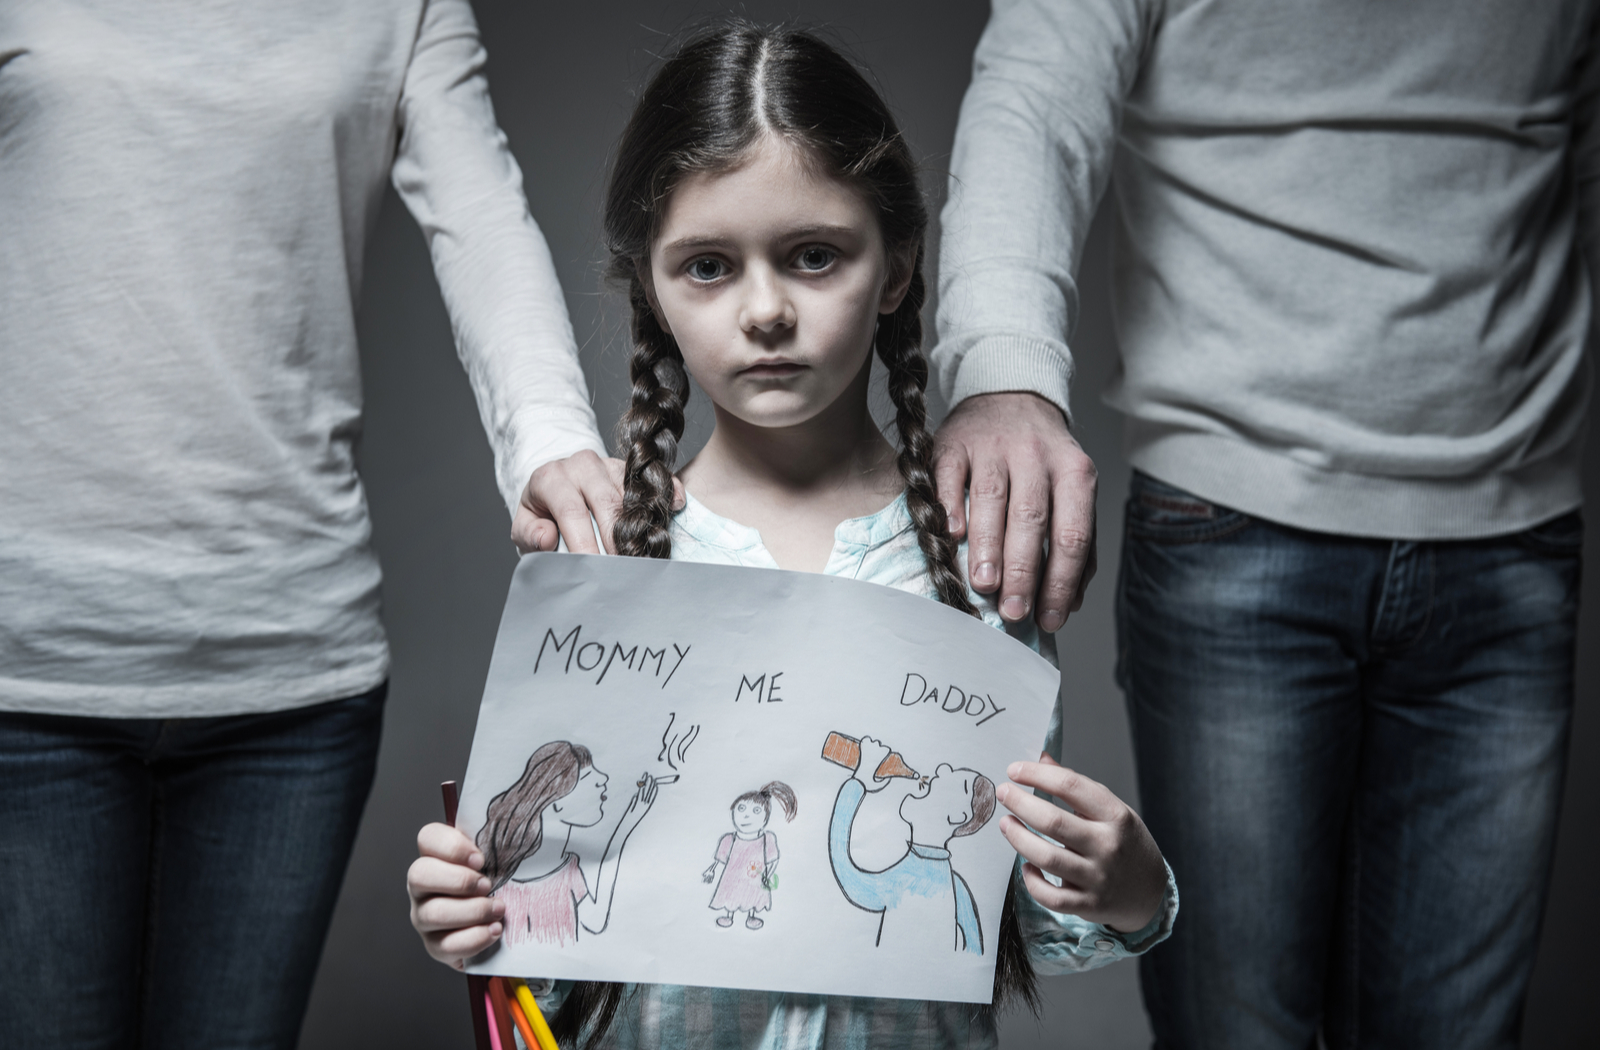 Sad girl standing in middle of parents concerned about mother and father with addiction